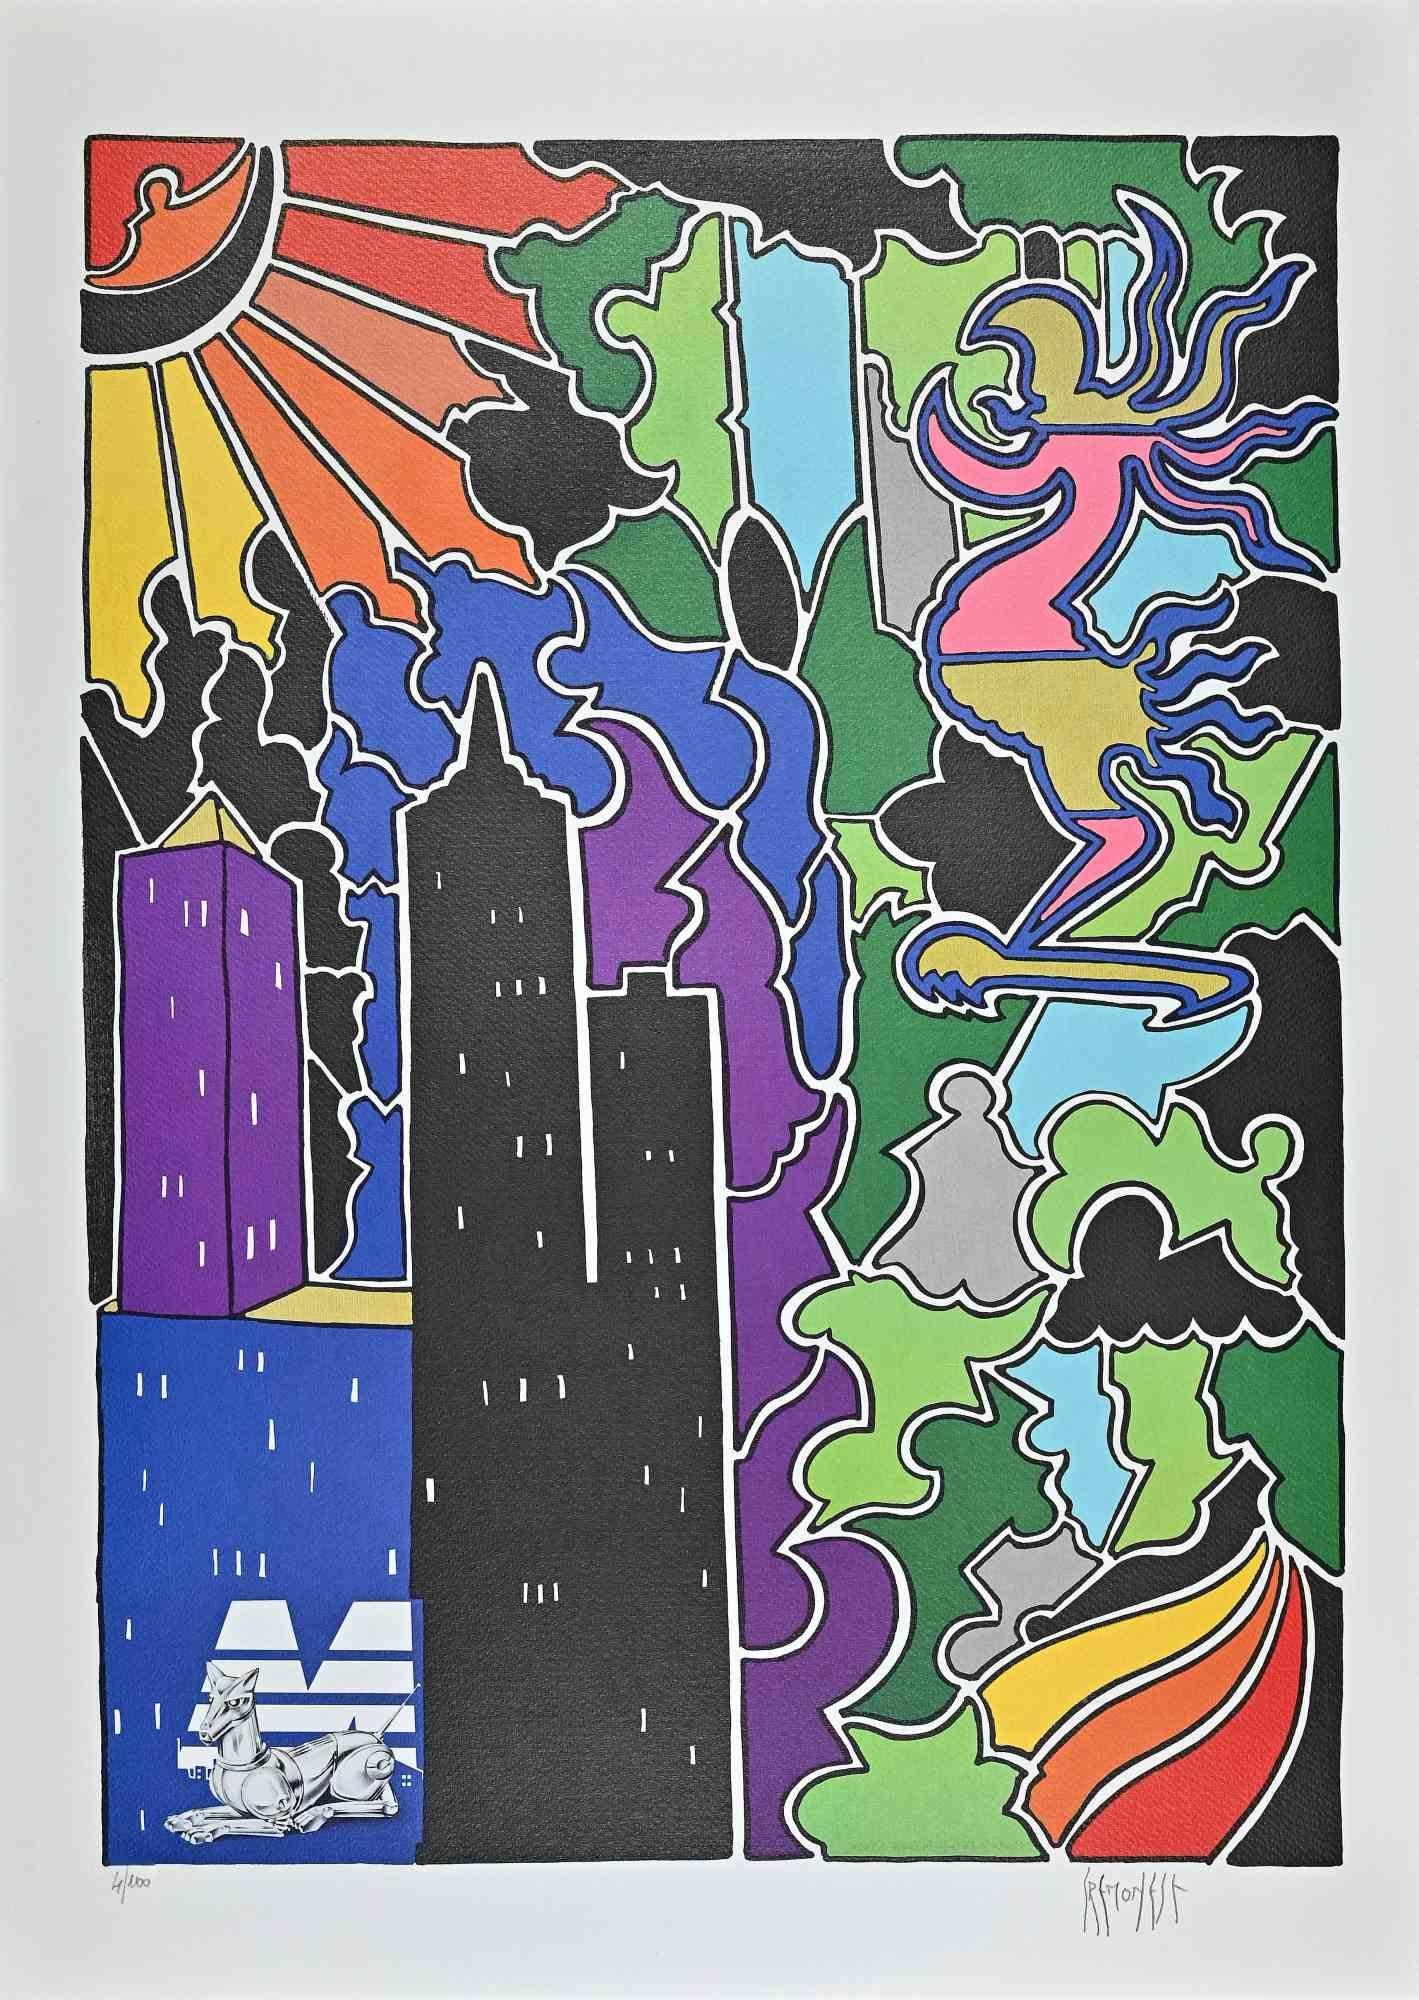 Abstract Urban Landscape  is an original print, realized in by the Artist Antonio Cremonese (Rome, 1949).

Color lithograph on paper. Hand Signed on the right margin. Limited edition, ex. 4/100

Good conditions.

Antonio Cremonese (Rome, 1949) is an